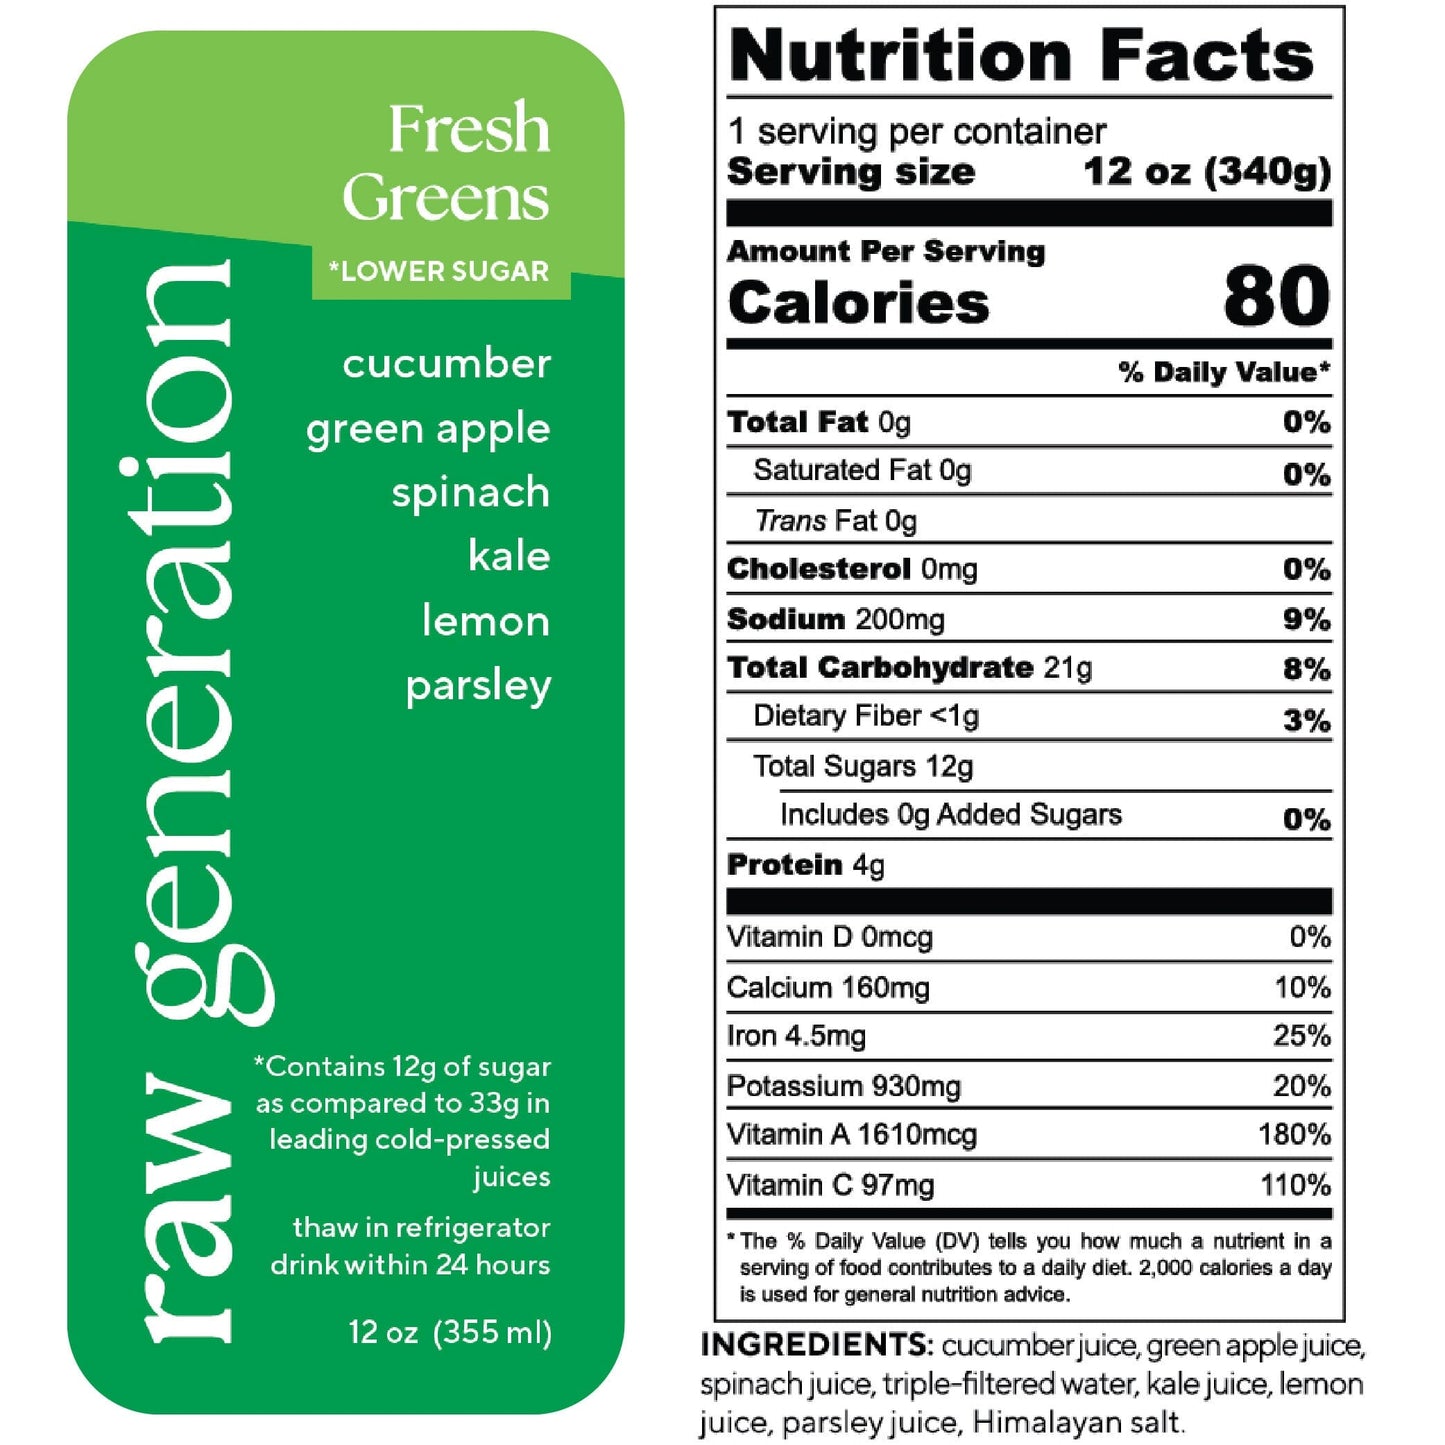 Nutrition Facts, 1 serving/container, 12 oz (340g), Calories 80, Total Fat 0g, Saturated Fat 0g, Trans Fat 0g, Cholesterol 0mg, Sodium 200mg, Total Carbohydrate 21g, Dietary Fiber <1g, Total Sugars 12g, Added Sugars 0g, Protein 4g, Vitamin D 0mcg, Calcium 160mg, Iron 4.5mg, Potassium 930mg, Vitamin A 1610mcg, Vitamin C 97mg; Ingredients: cucumber juice, green apple juice, spinach kale juice, lemon juice, parsley juice, Himalayan salt.